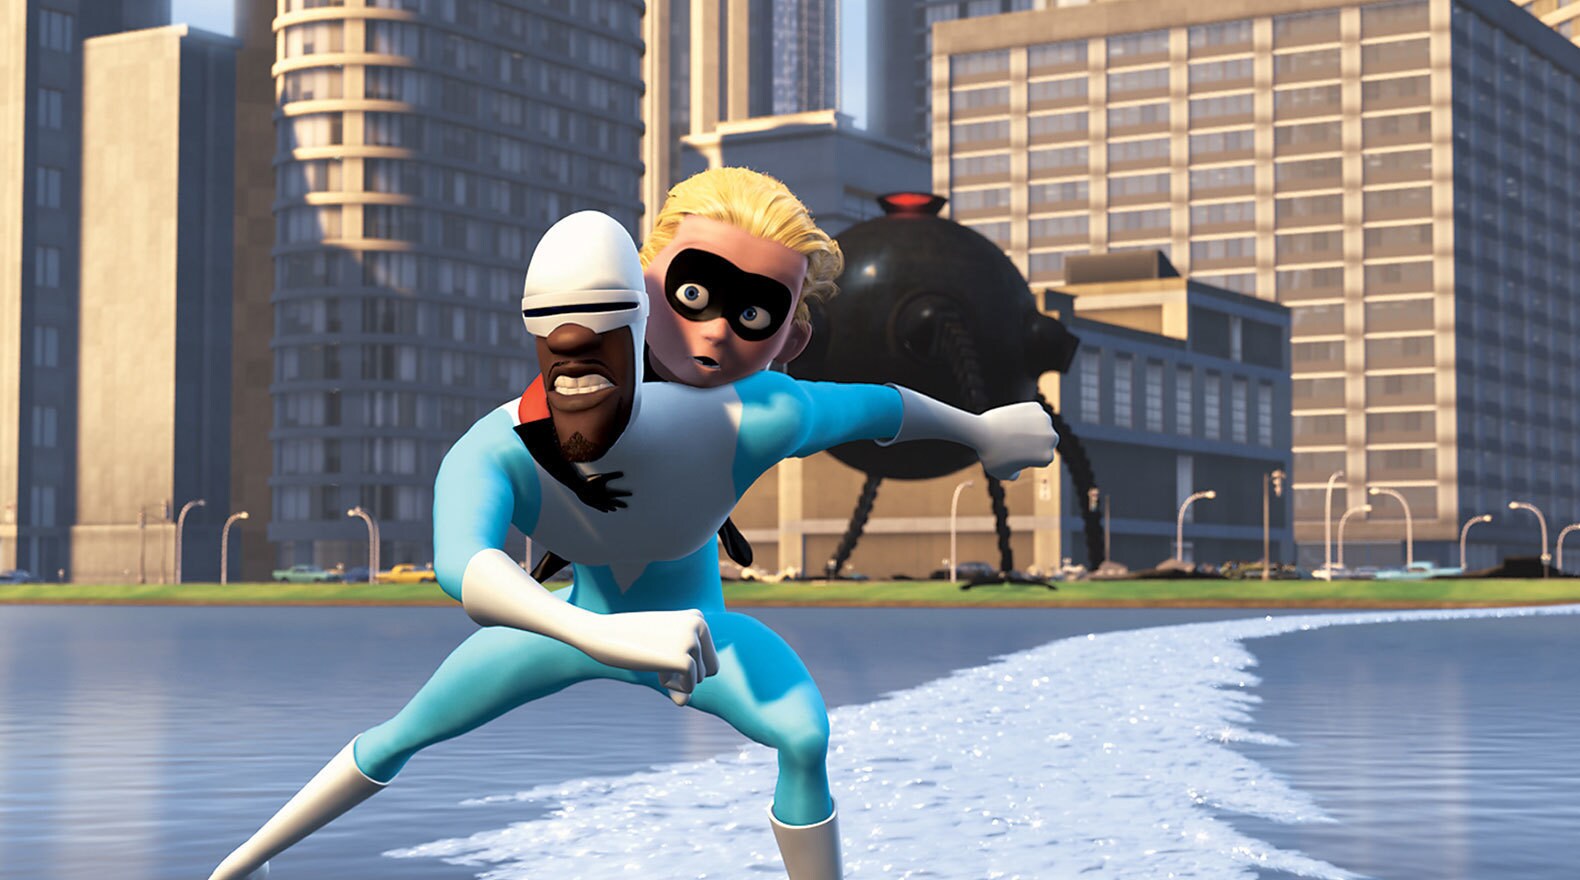 Frozone gives Dash a lift while making it hard for the Omnidroid to follow in the "Incredibles"